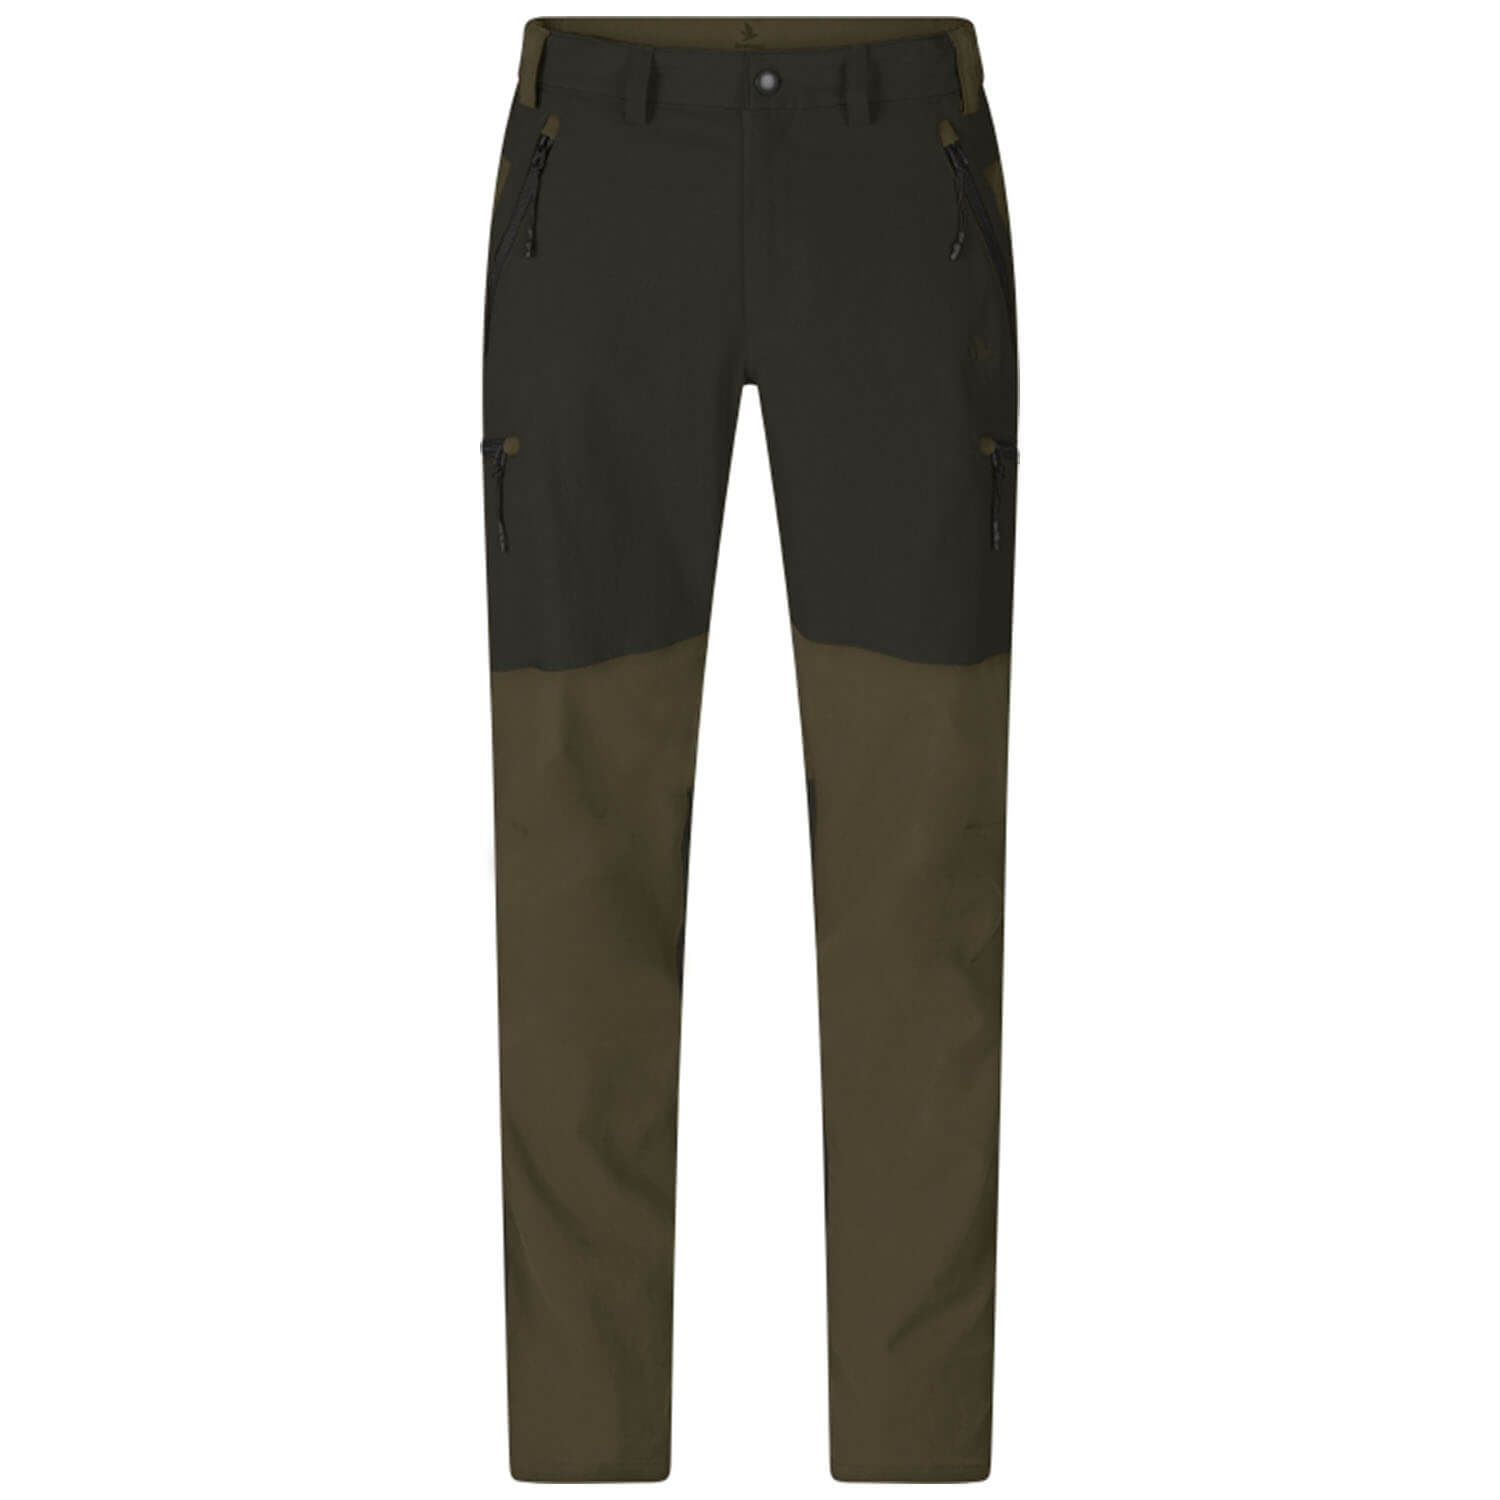 Seeland hunting pants outdoor stretch (grizzly brown) - Hunting Trousers